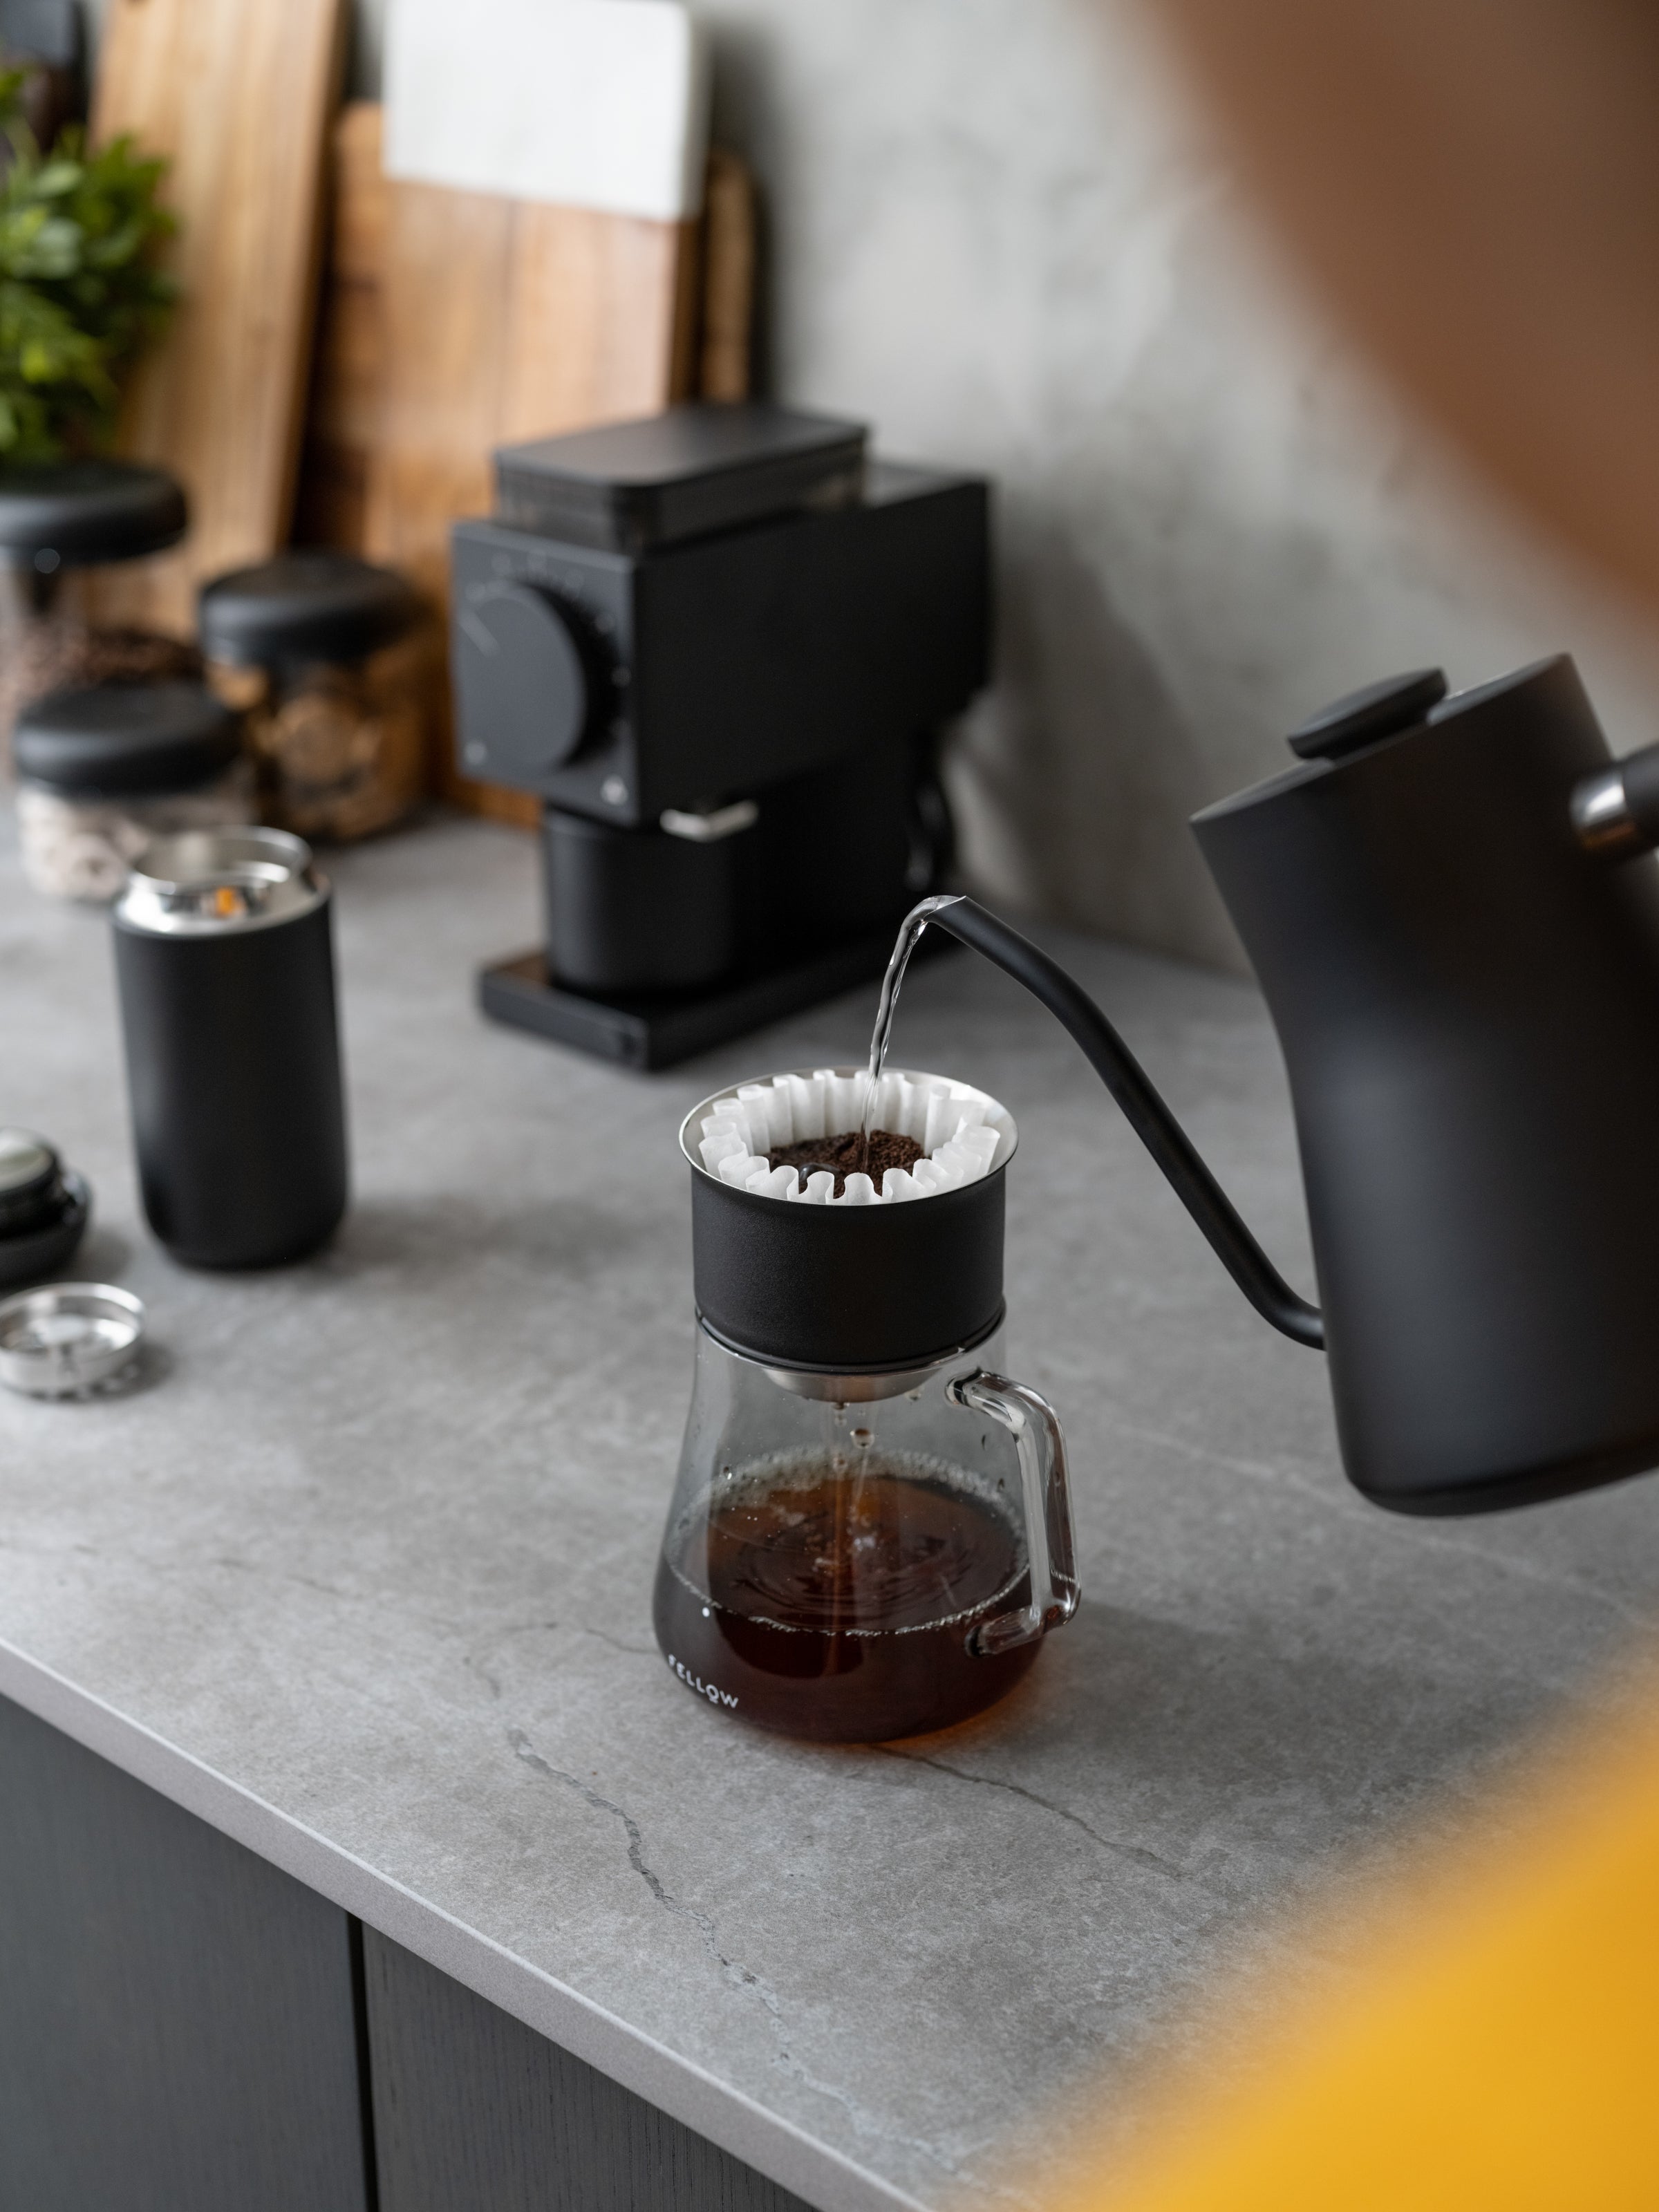 Fellow Stagg [X] Pour-Over Dripper - Hacea Coffee Source